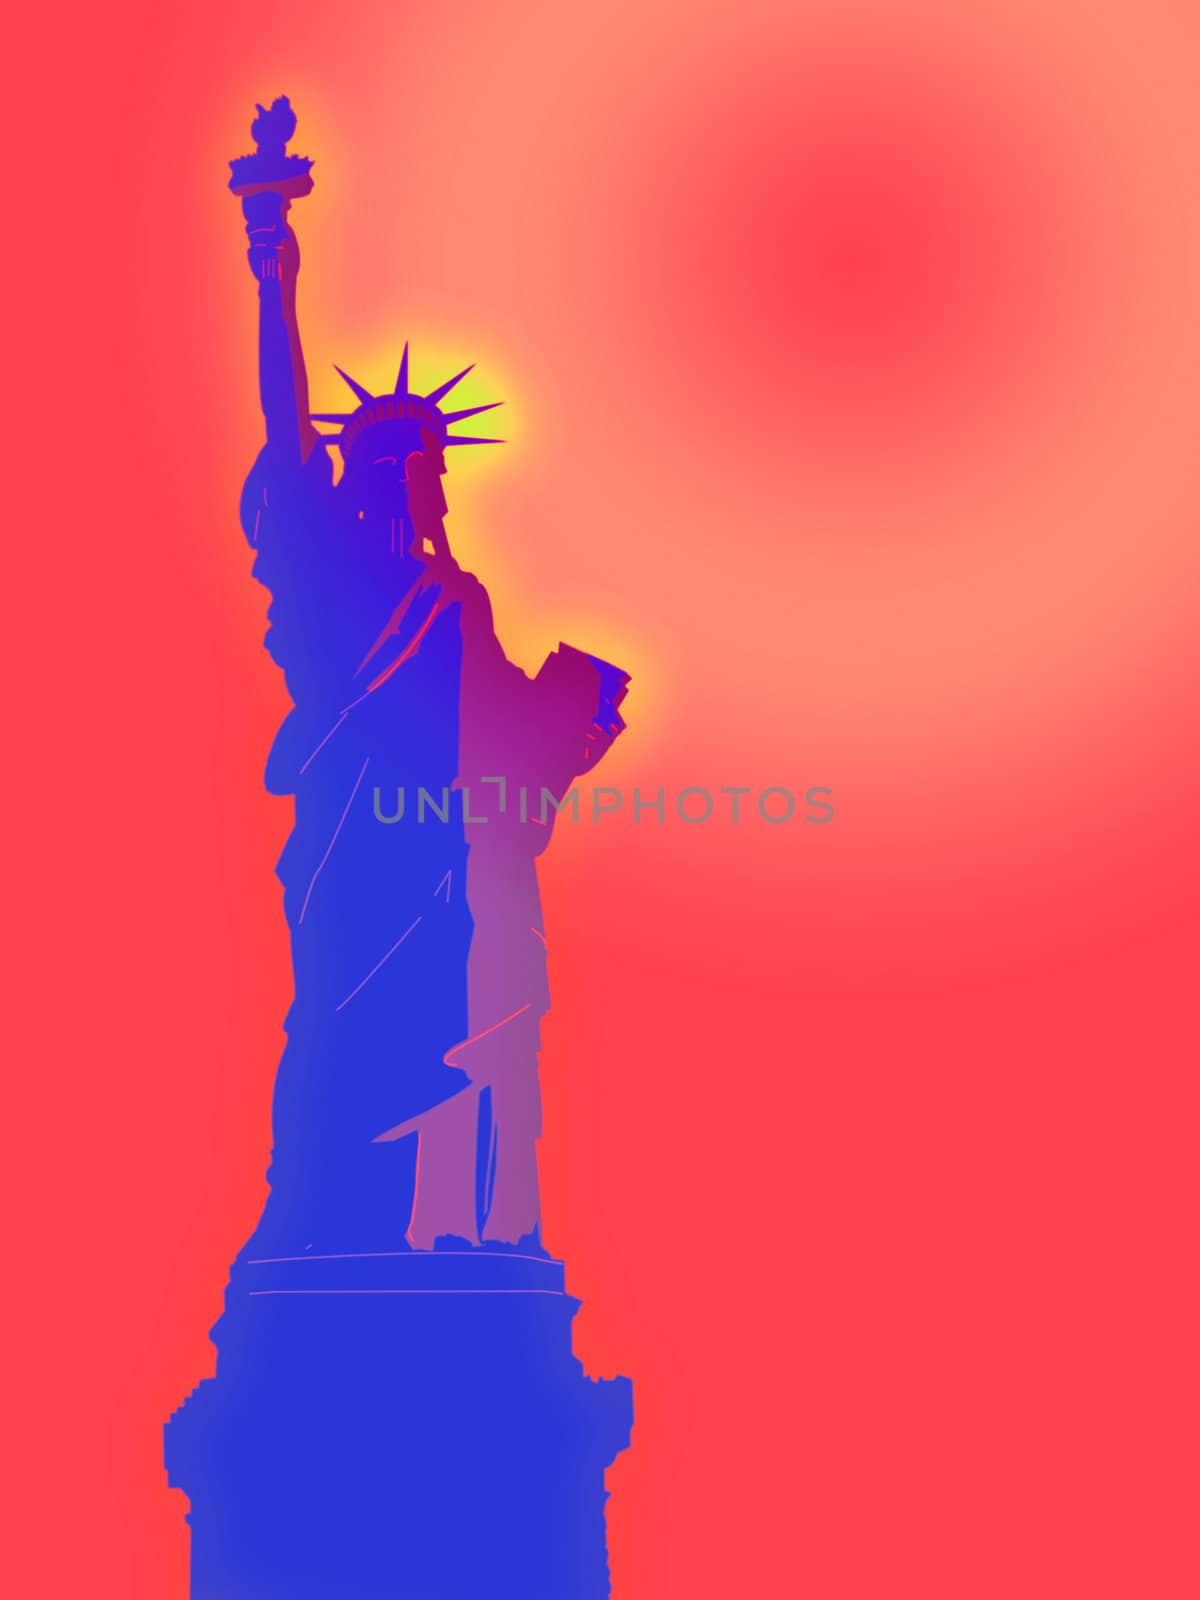 Statue of Liberty Illustration at Dawn with a Bright Sky by bobbigmac